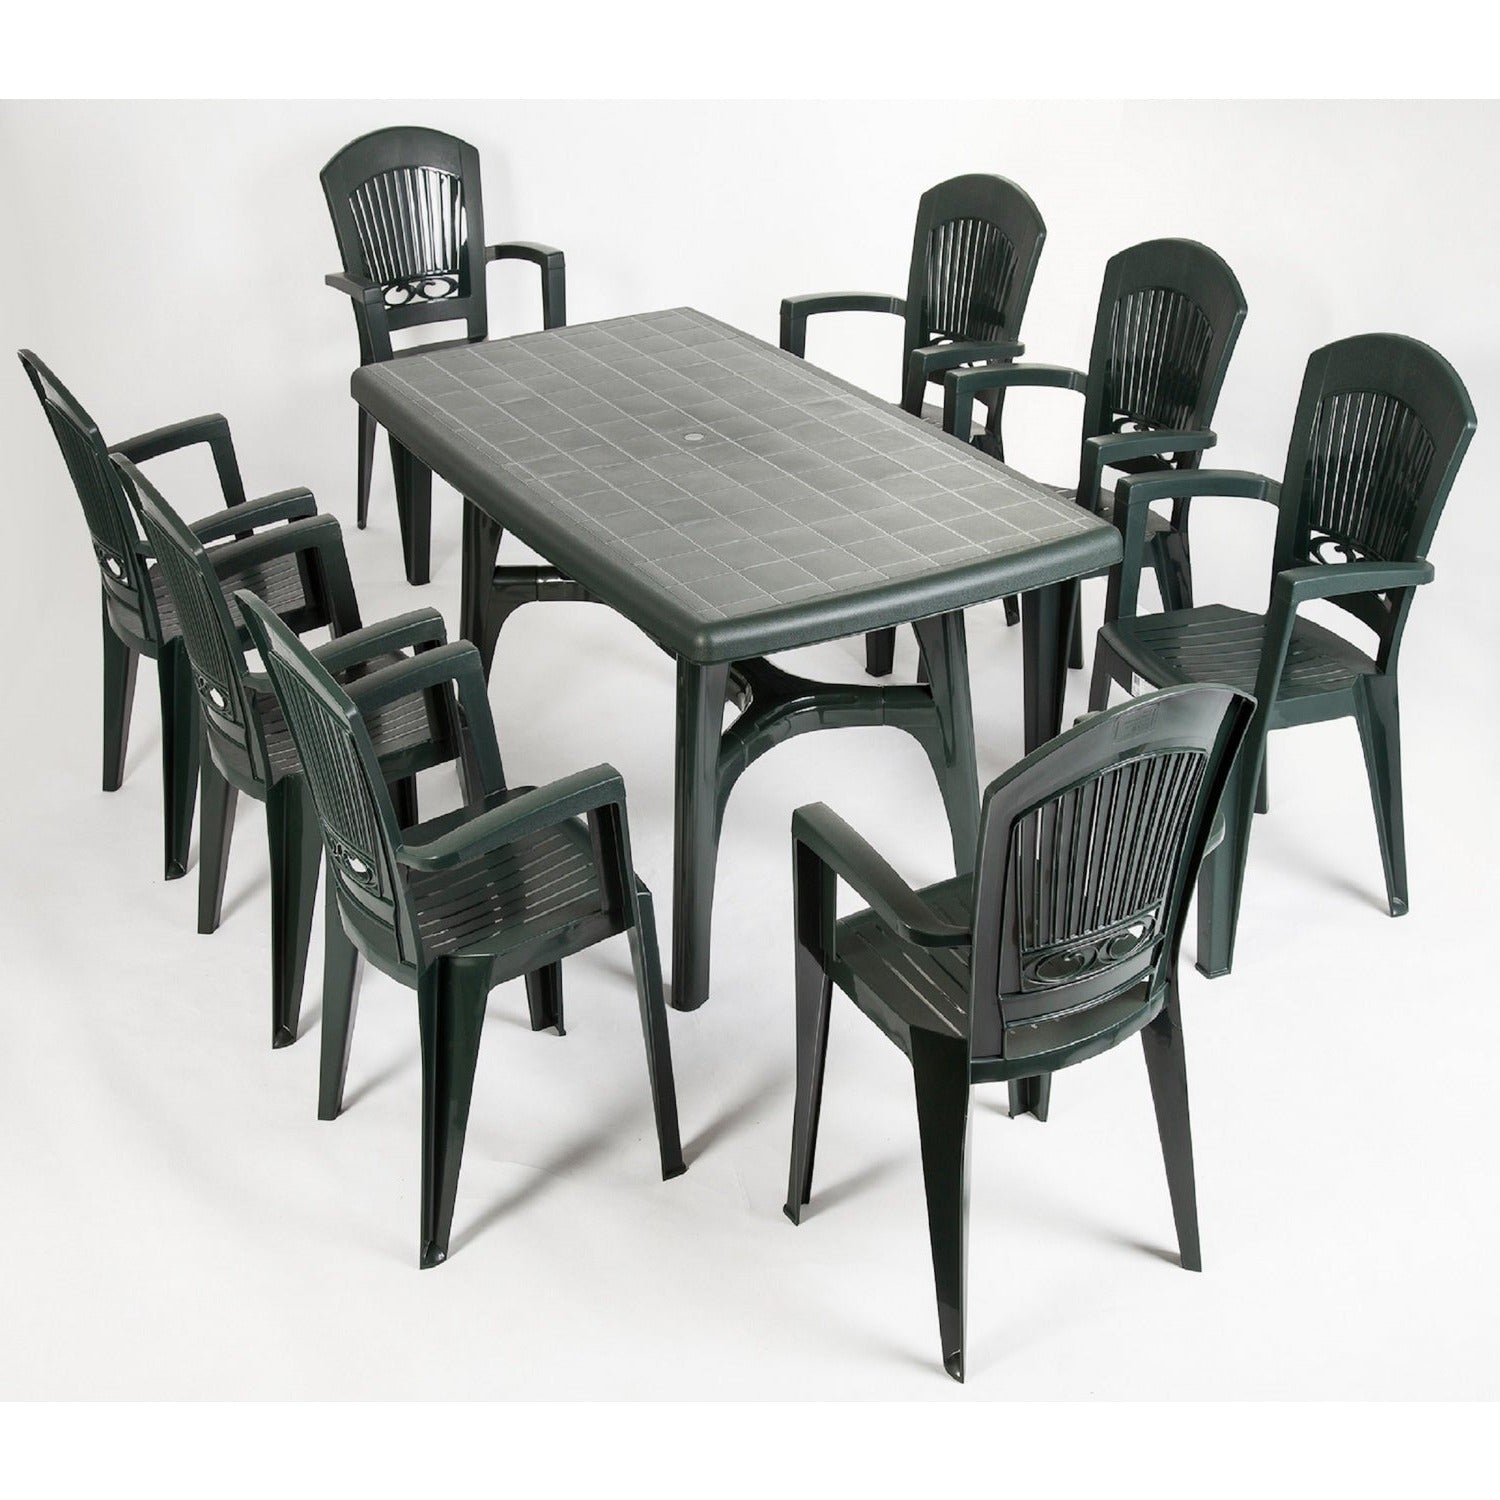 President Tris 9 Piece Extendable Outdoor Resin Dining Set by Scab Design